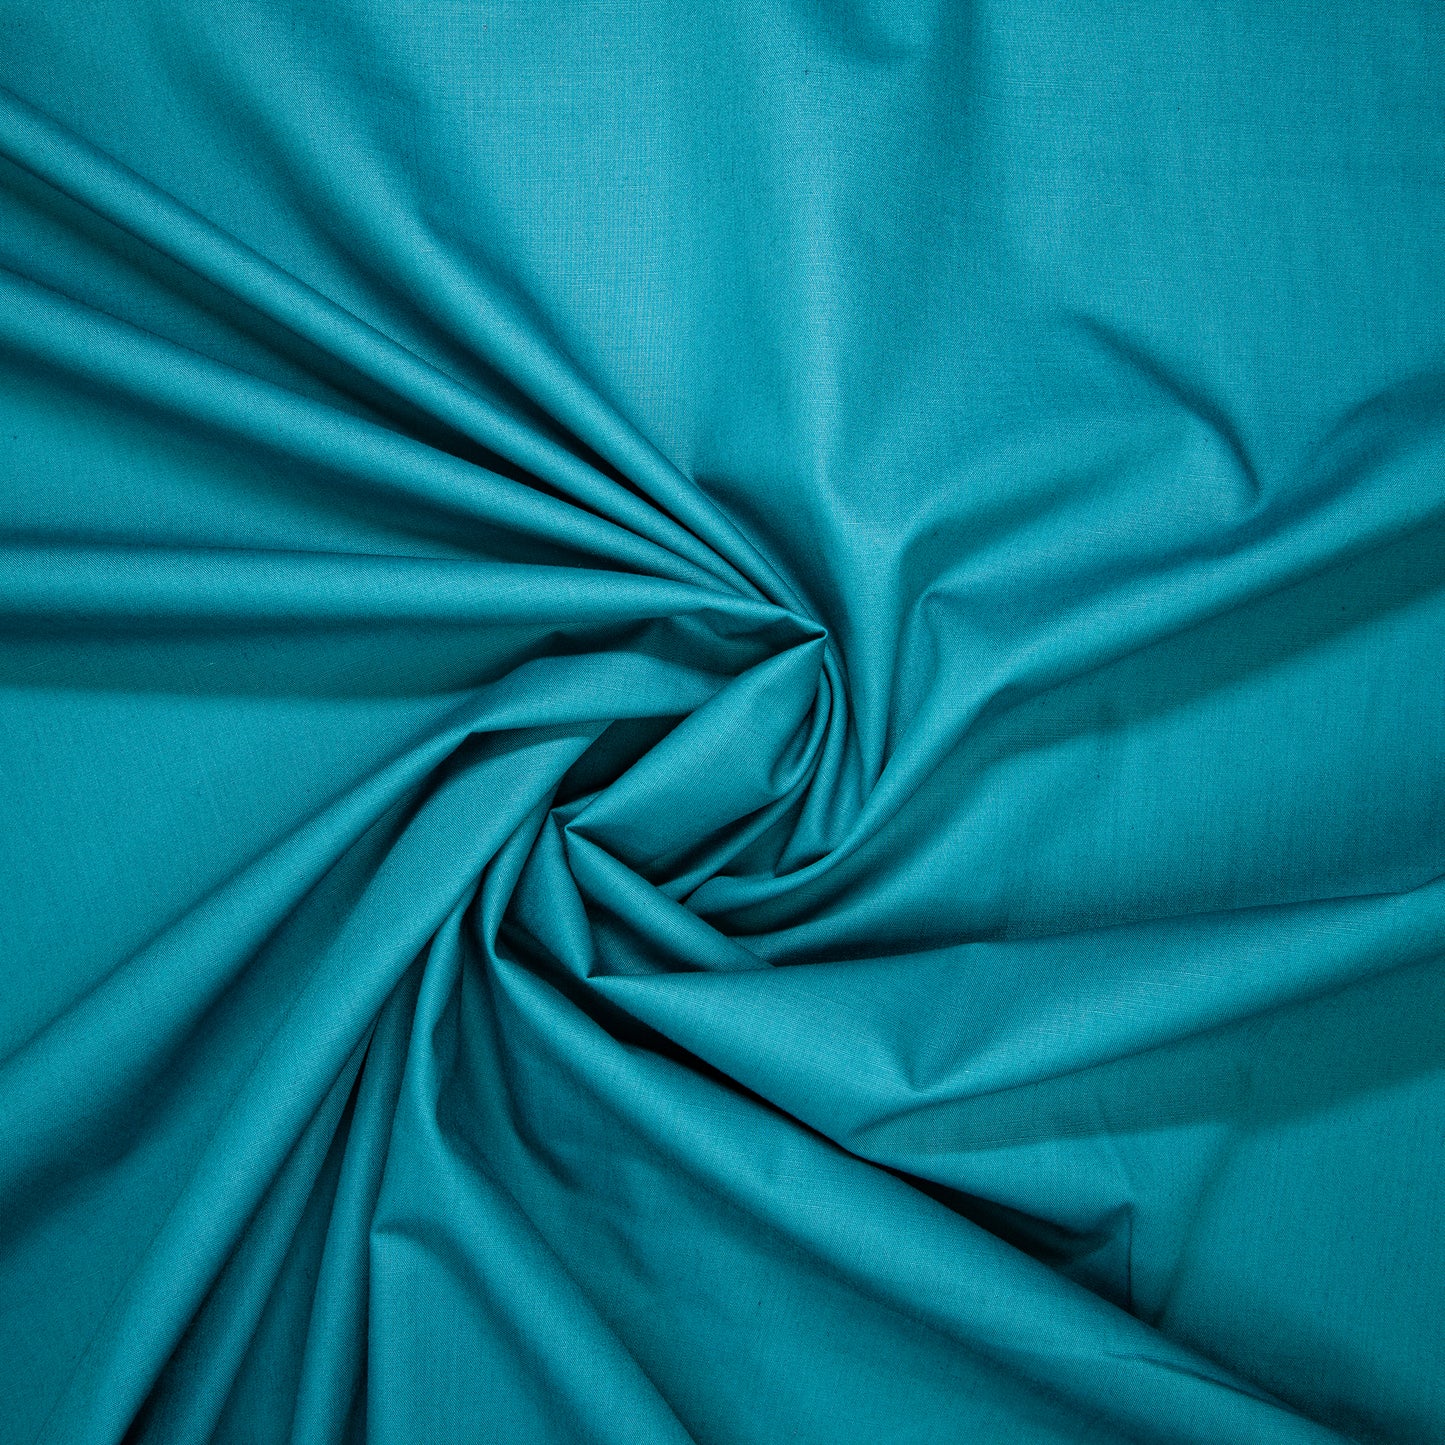 Cotton - Solid - Turquoise (wide)